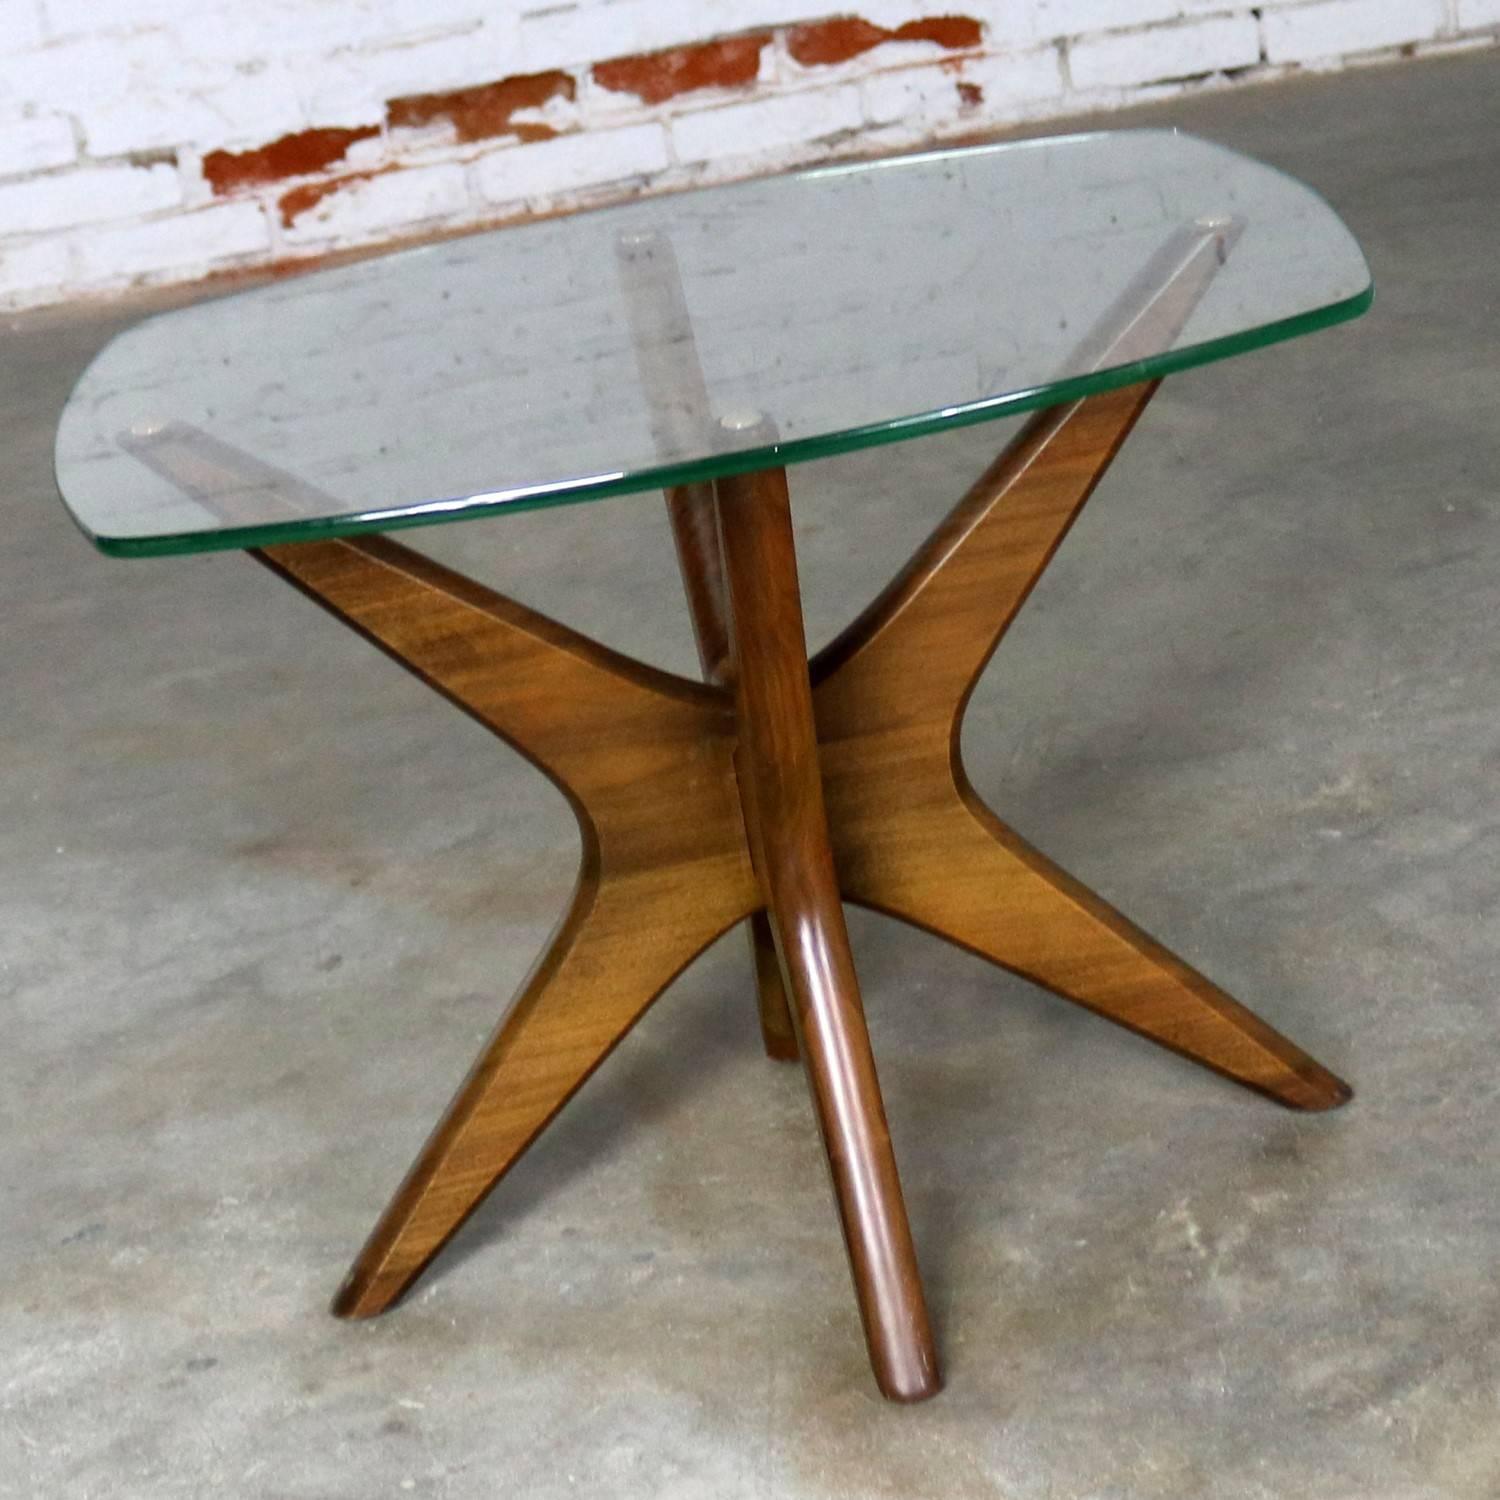 Handsome iconic Mid-Century Modern jacks side or end table by Adrian Pearsall for Craft Associates in walnut with glass top. This fabulous table is in wonderful original vintage condition. It does have a couple nicks in the legs as you would expect